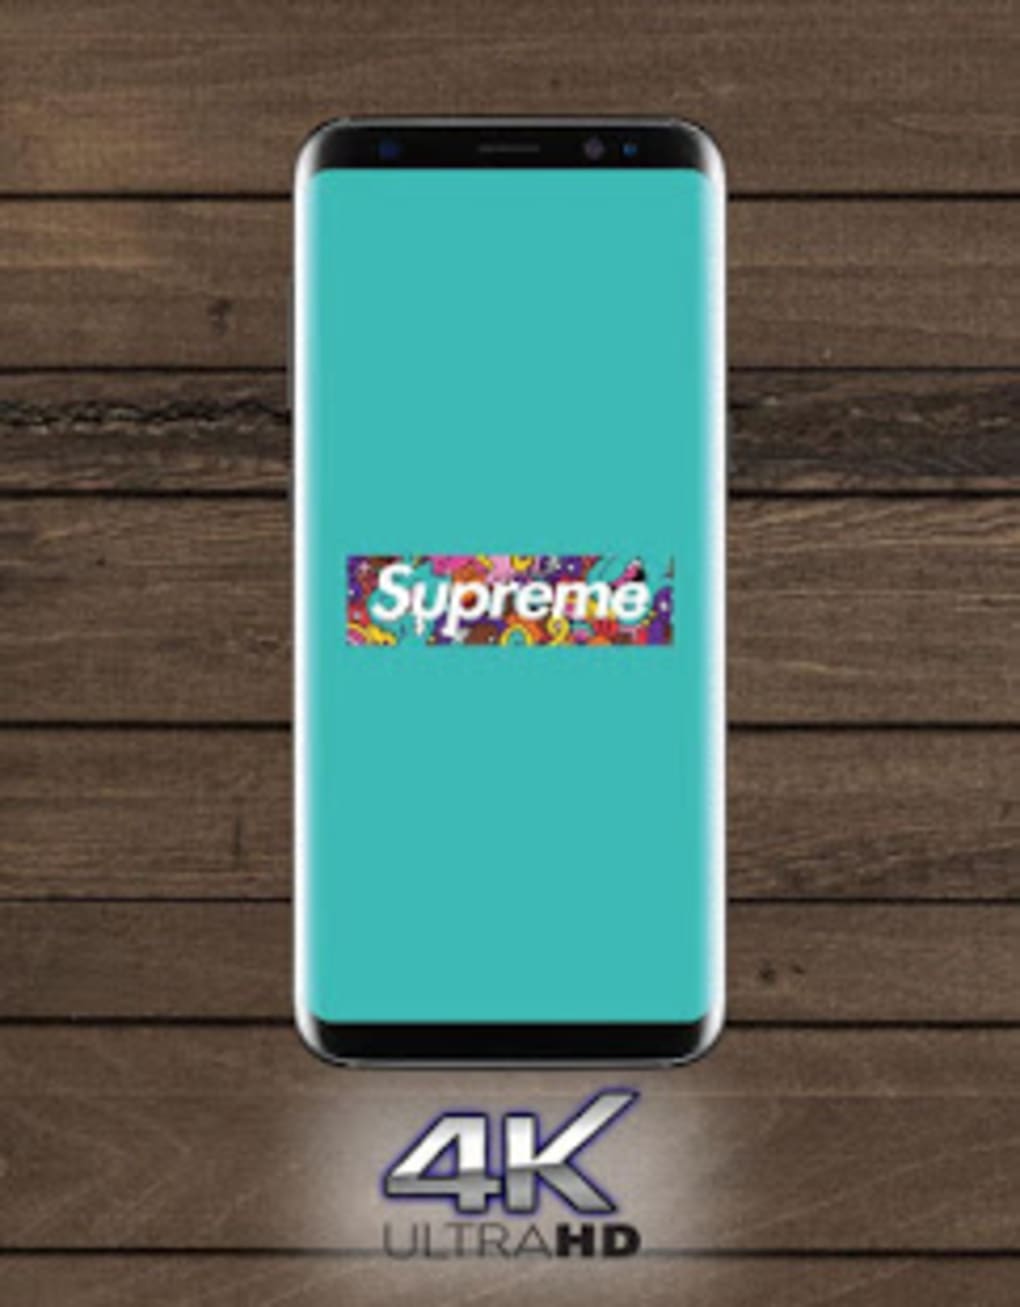 Best Supreme Wallpaper 4k Hd - Android Application Package - HD Wallpaper 